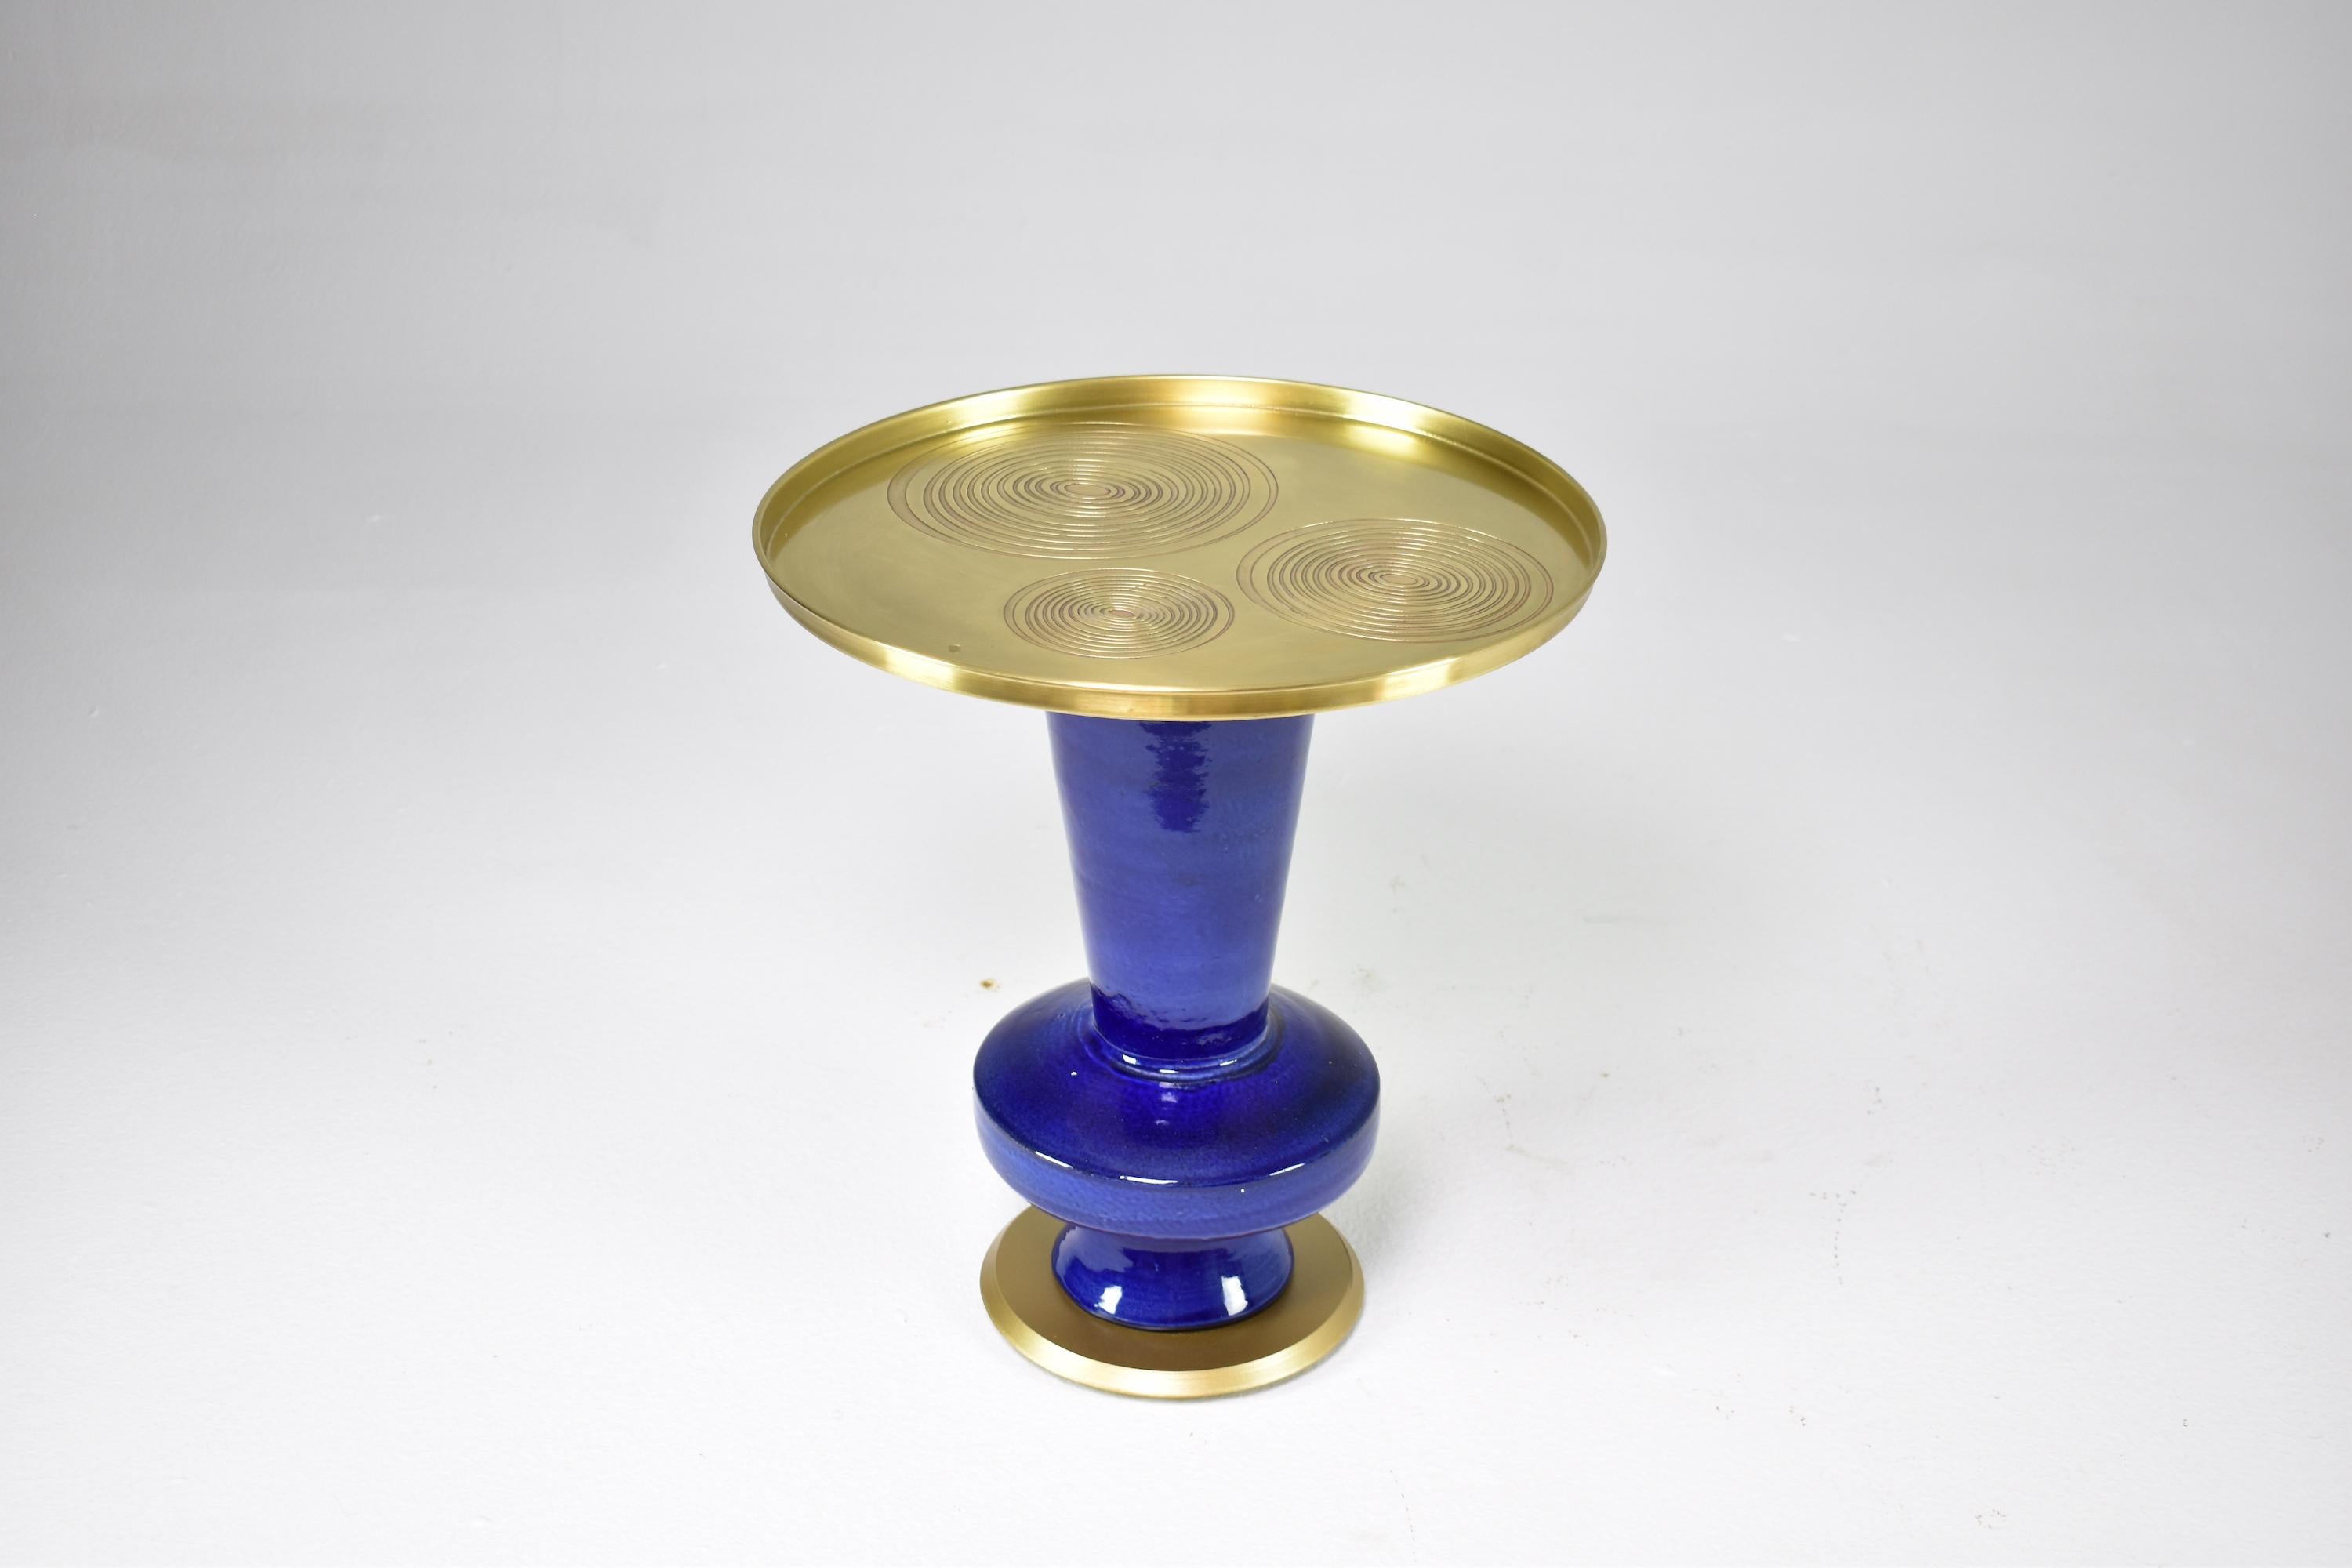 A handcrafted one of a kind gueridon side table designed by Jonathan Amar at his atelier in Rabat with an organically shaped blue enamelled ceramic structure and a brass tabletop with hand engraved circular details. 

Ø 41 cm (16,1